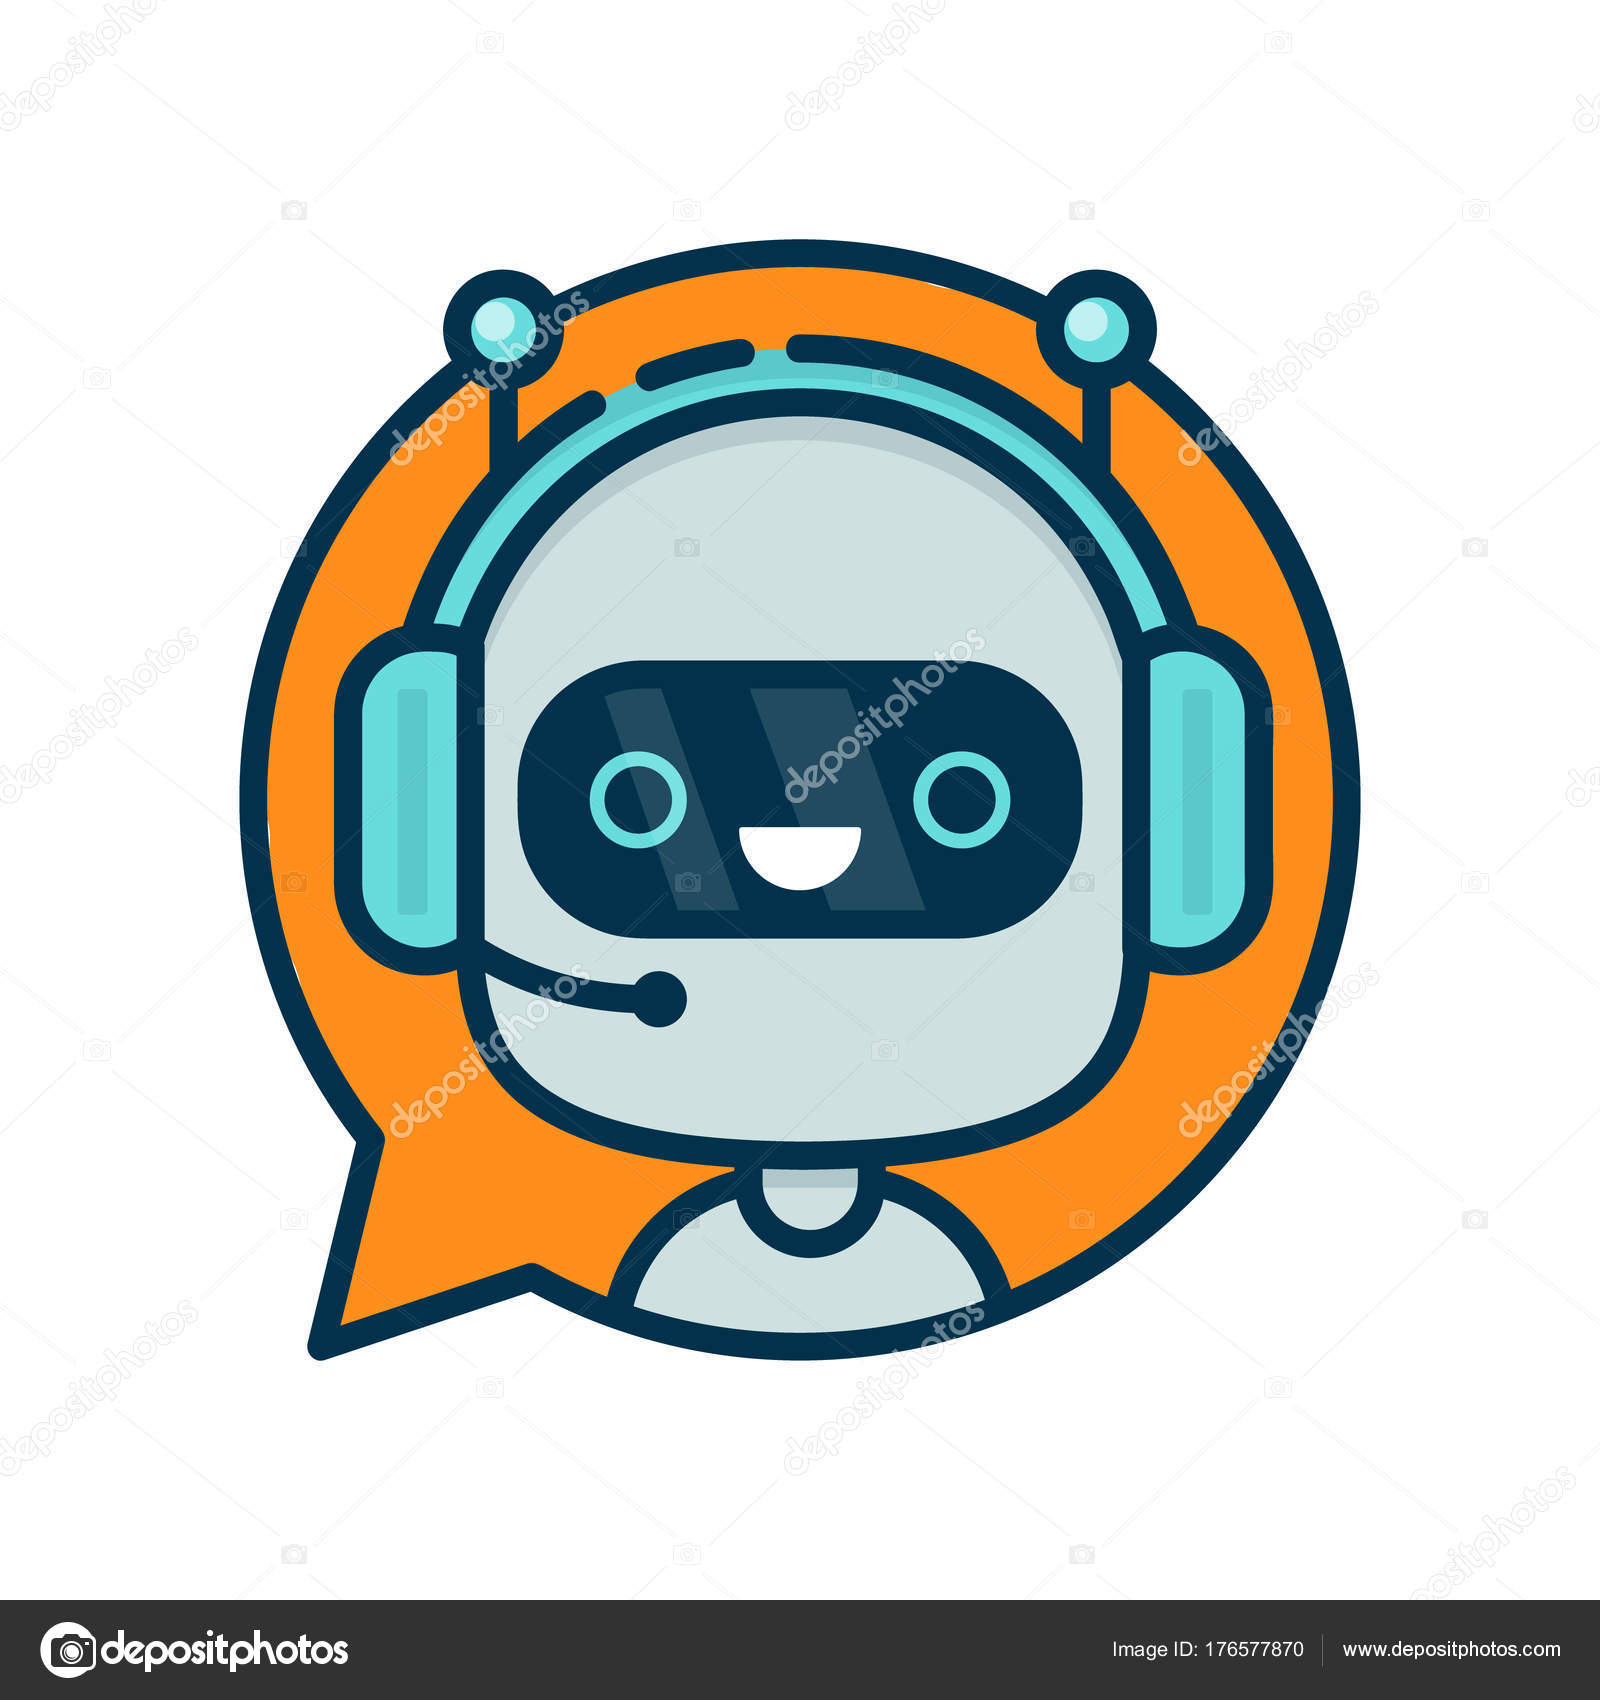 Online robot chat